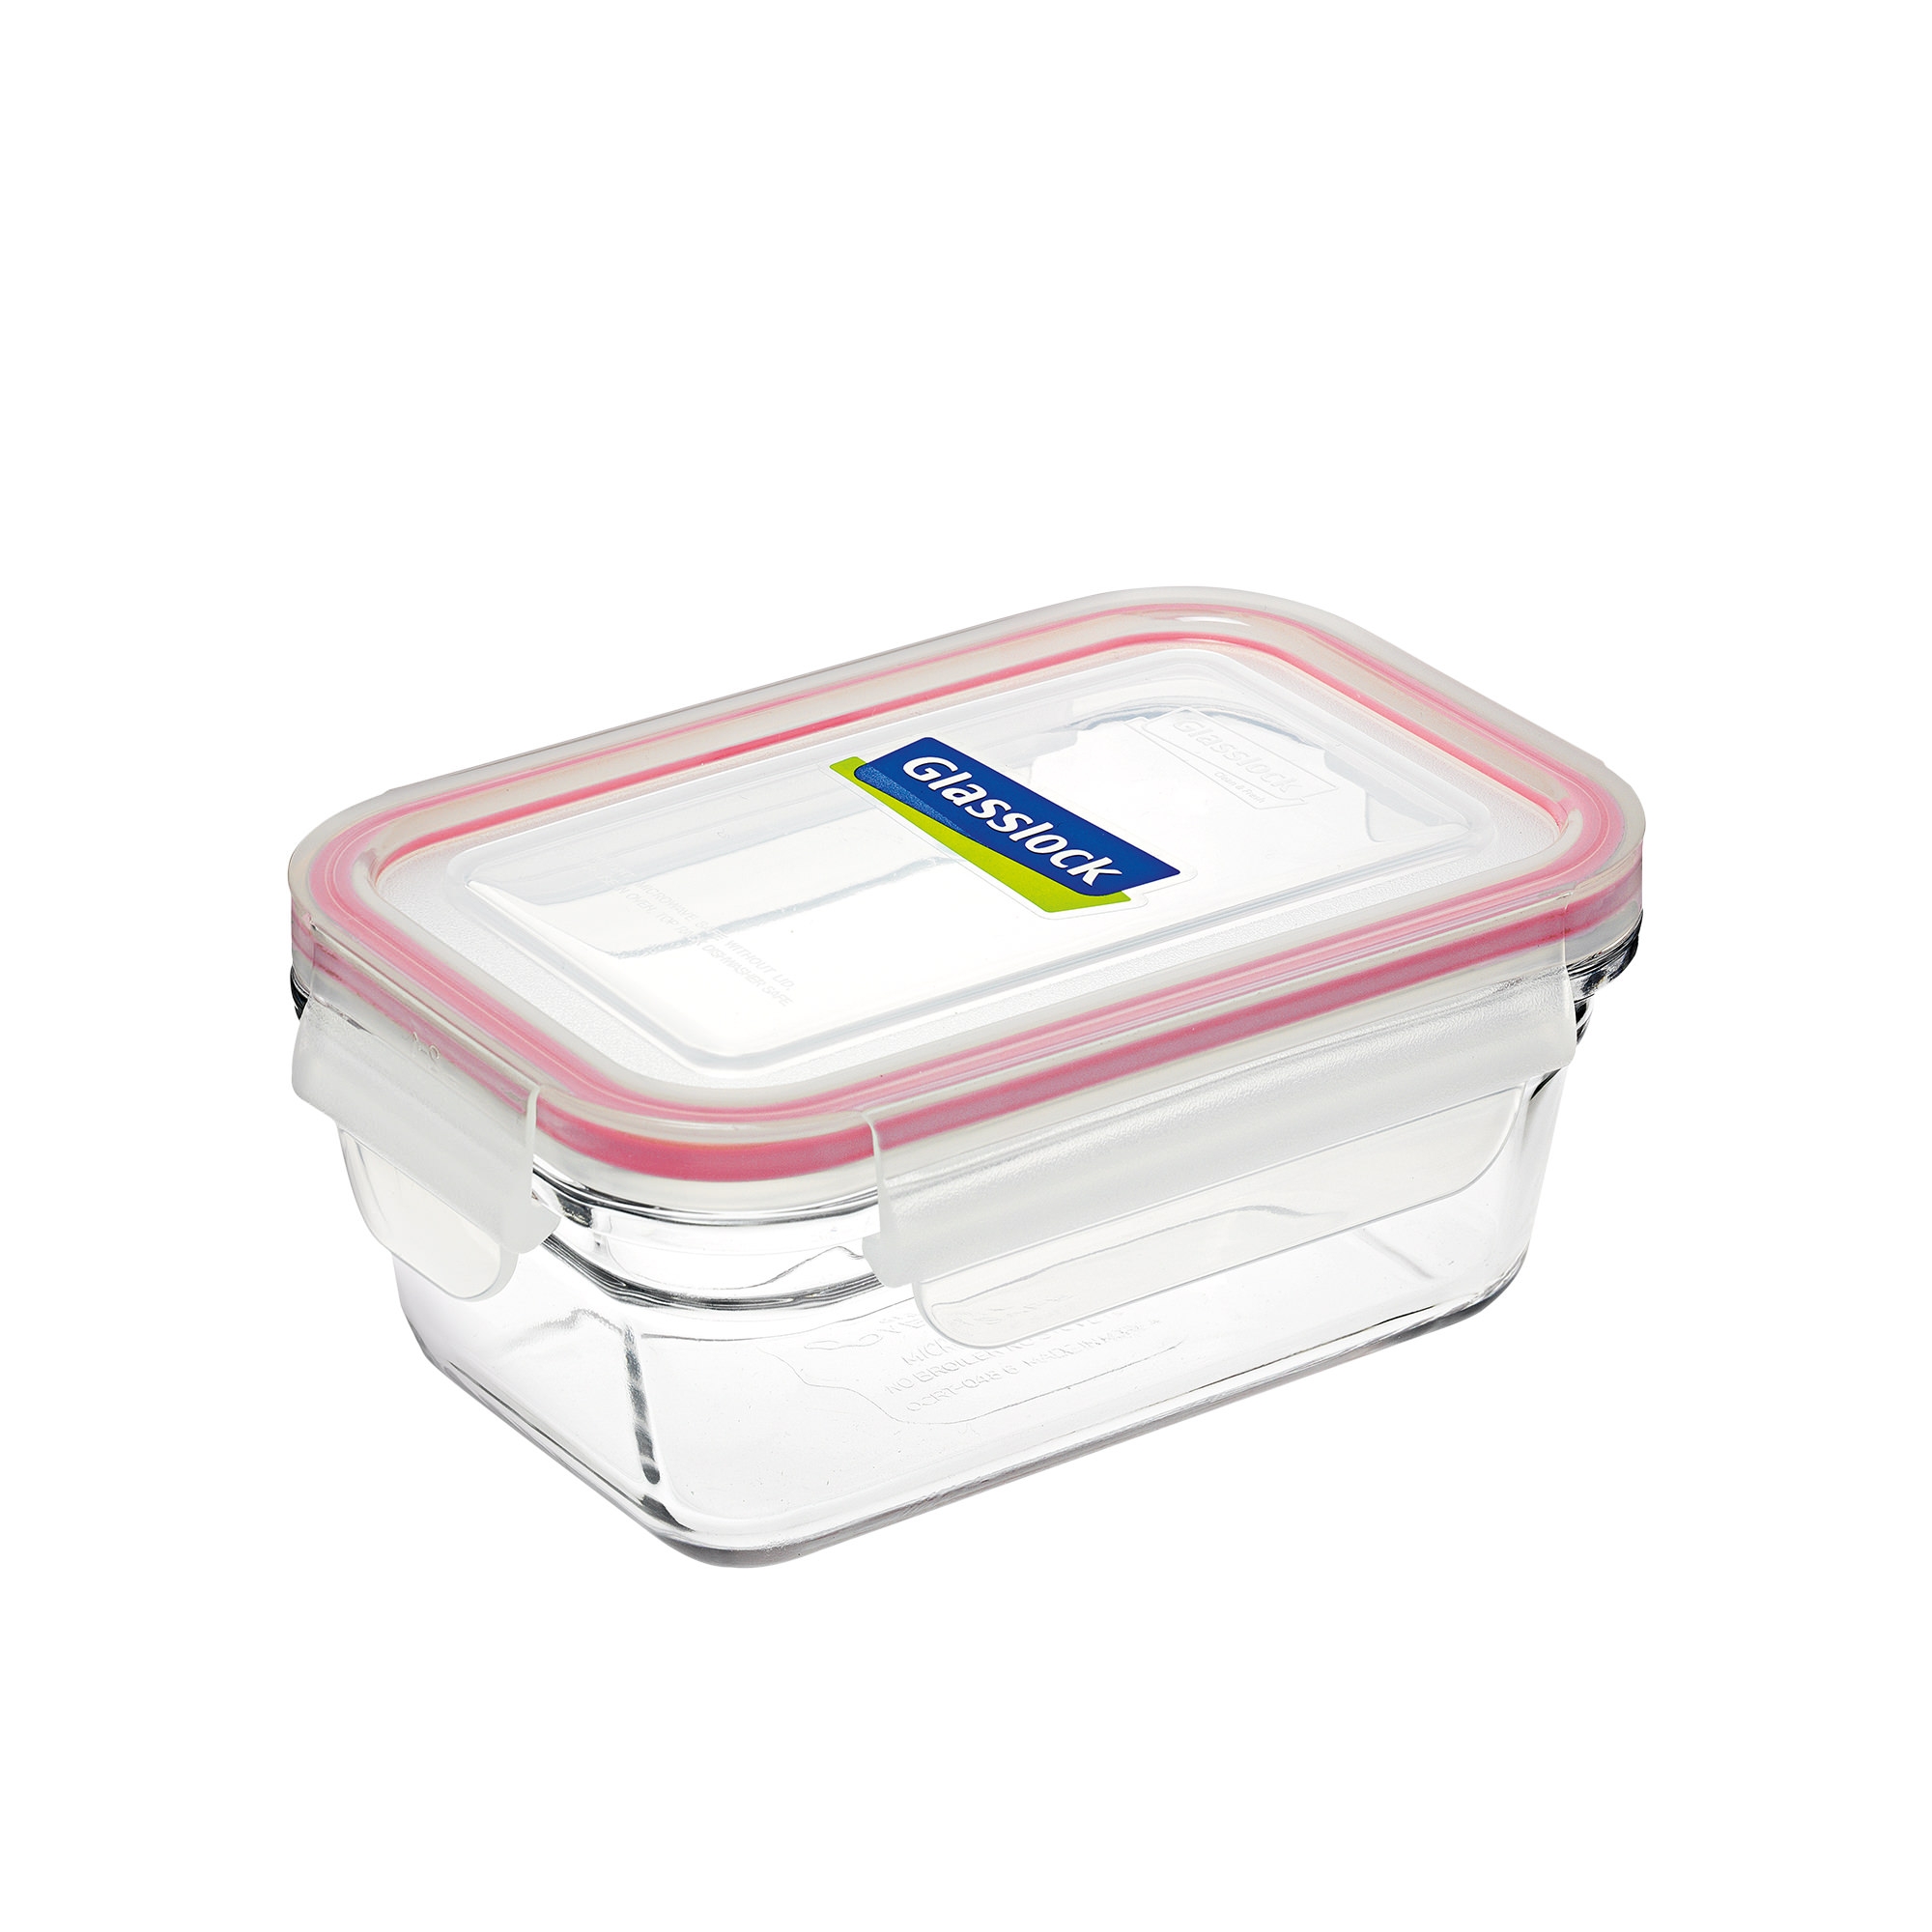 Glasslock Oven Safe Rectangular Container 970ml Image 1